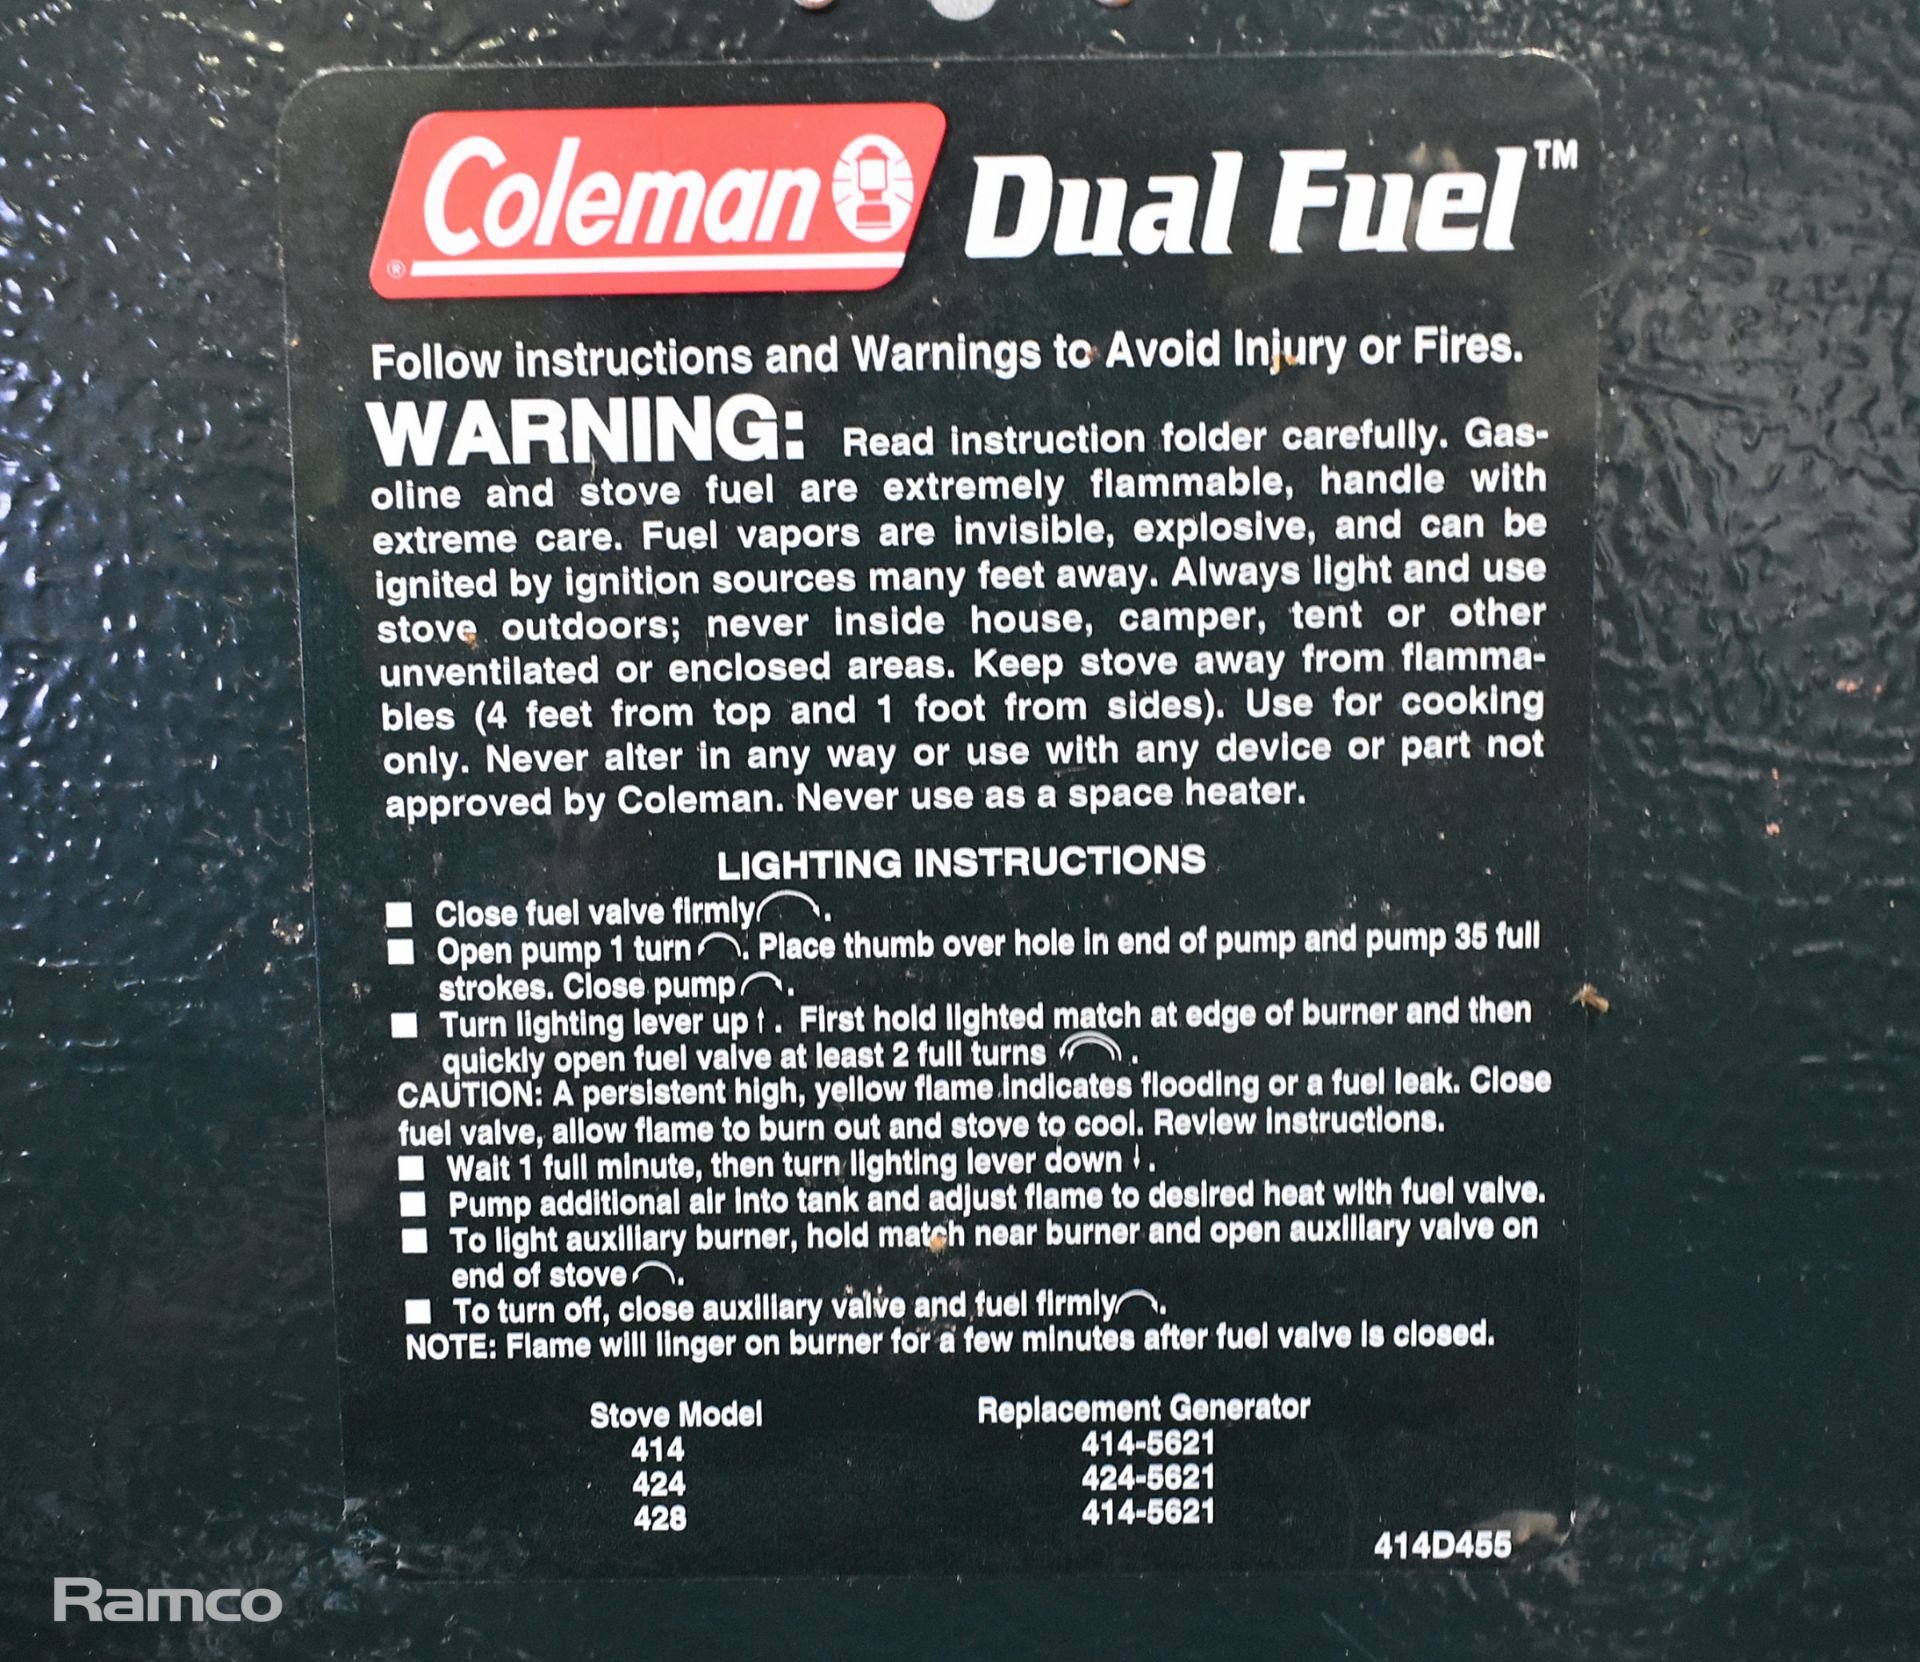 Coleman dual fuel twin burner gasoline camping stove - Image 5 of 8